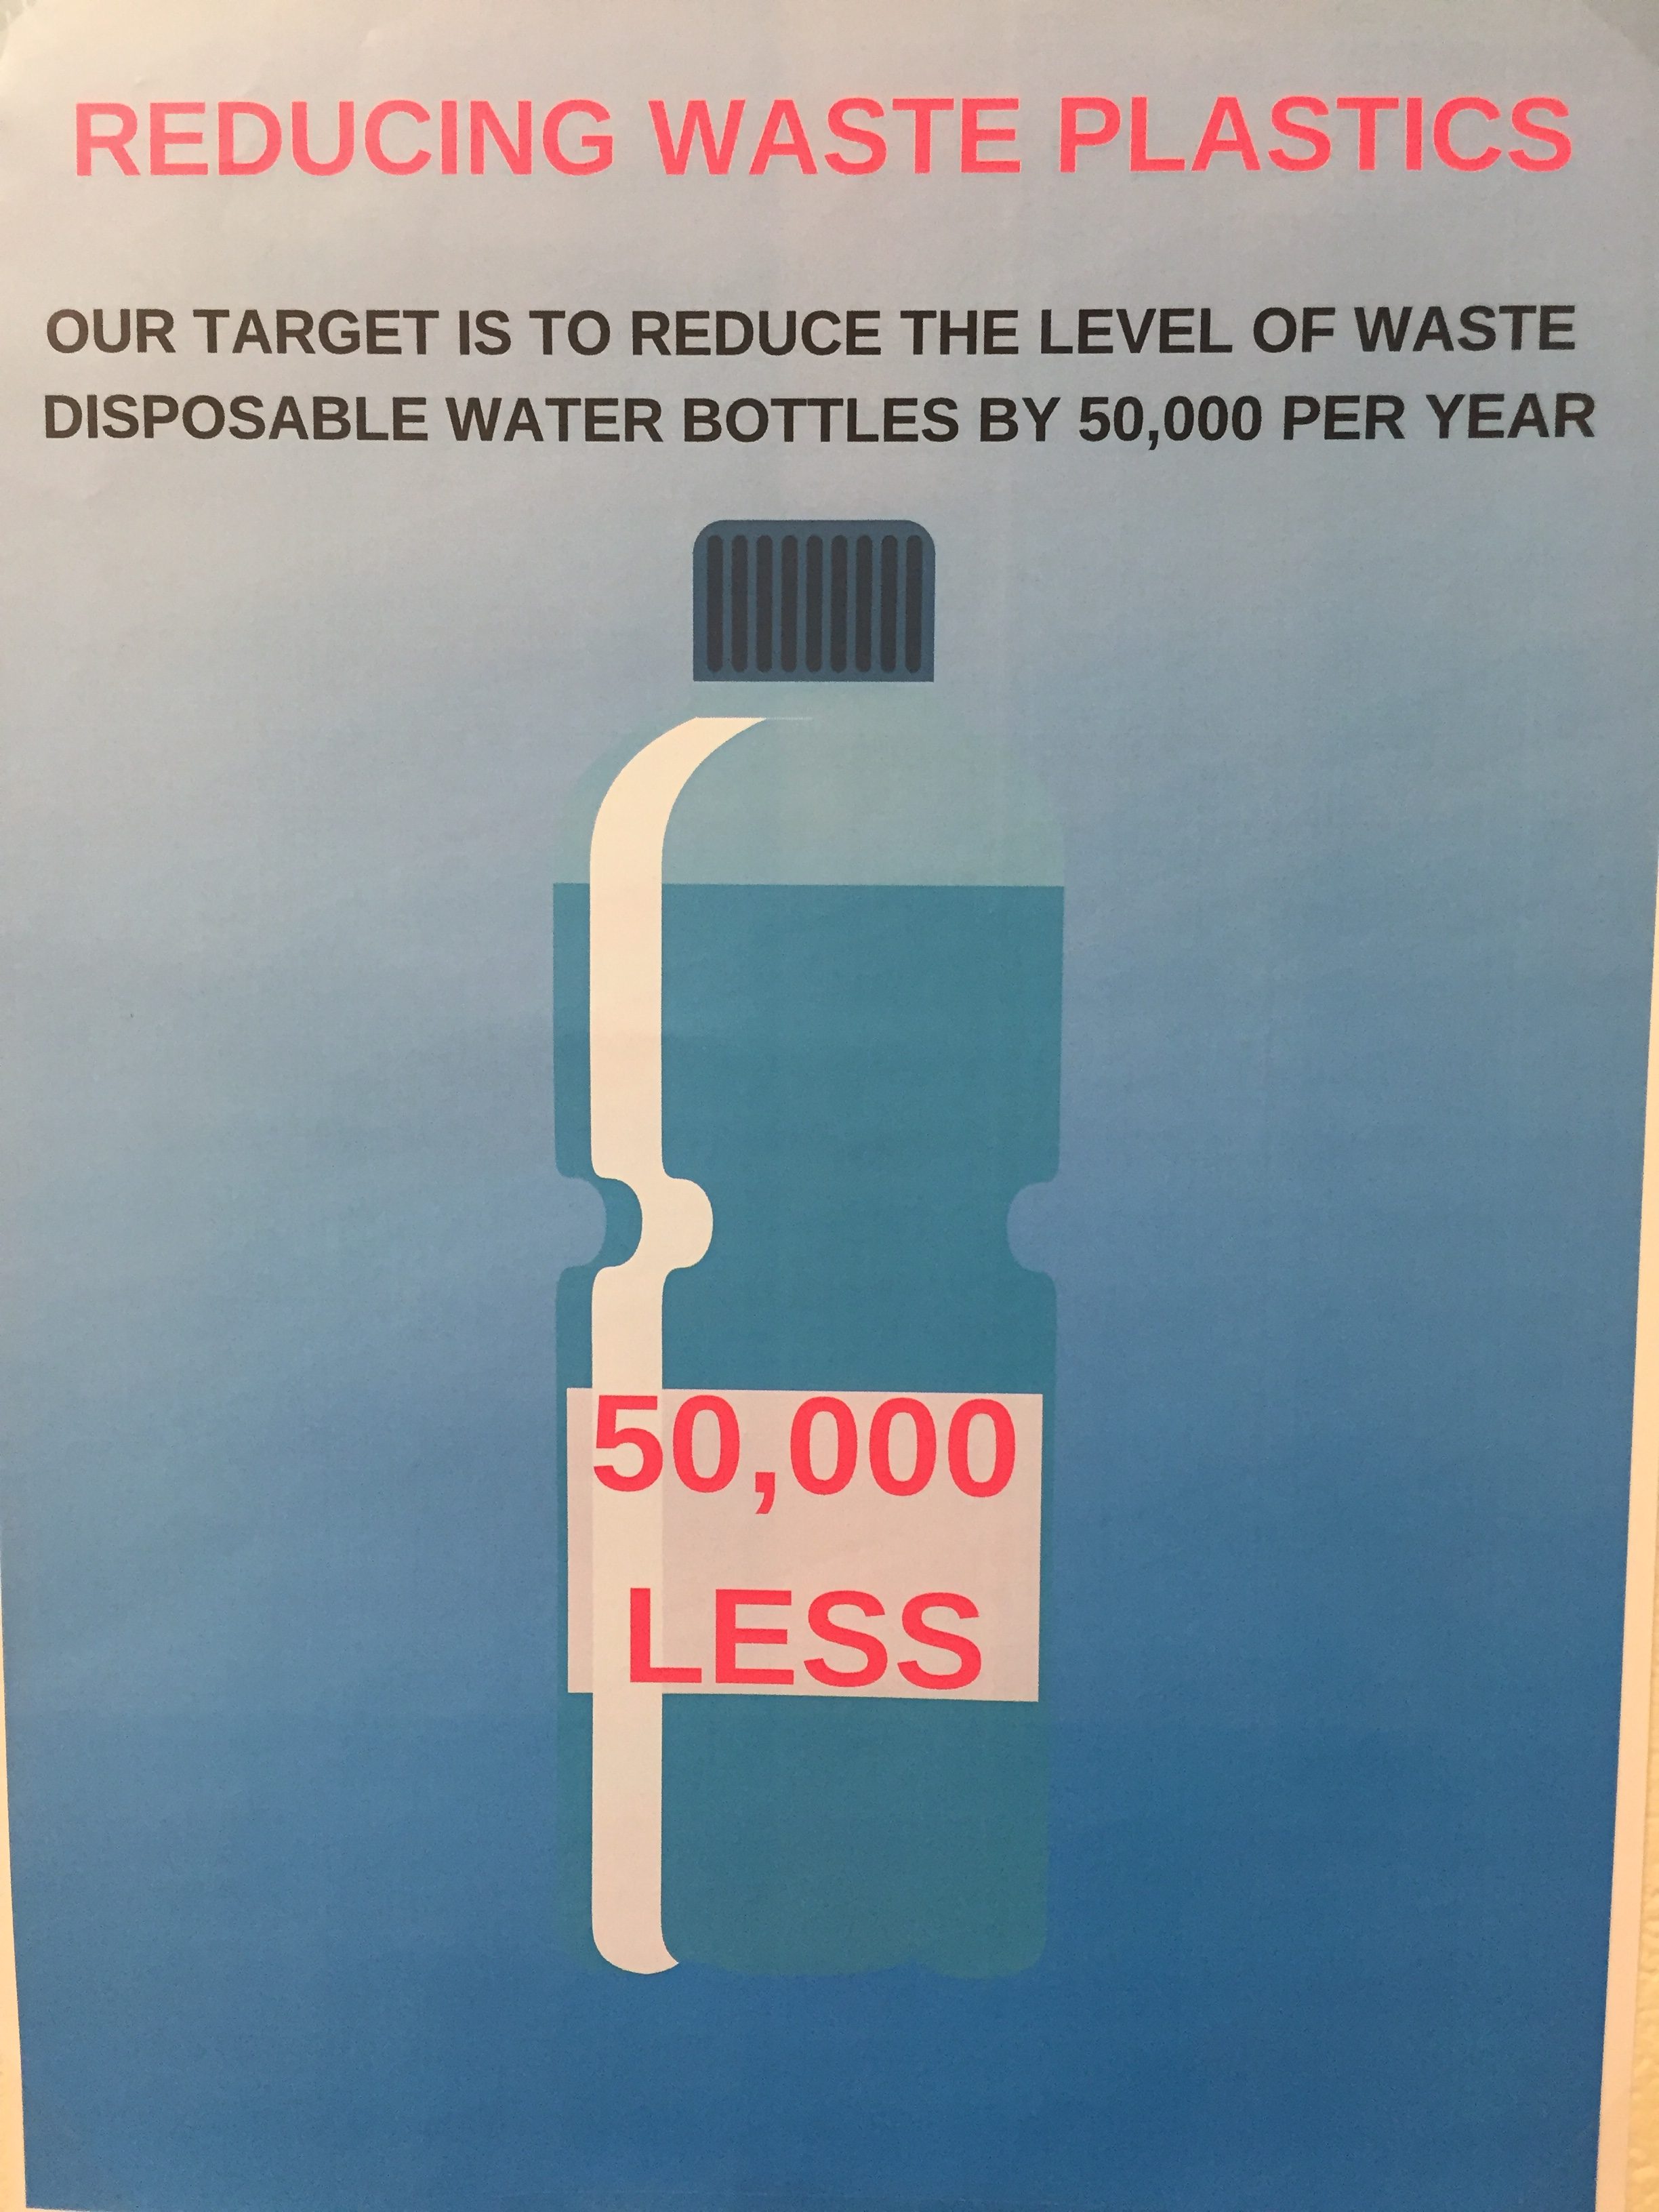 Desmond College reducing plastic waste, helping the environment, and getting healthy